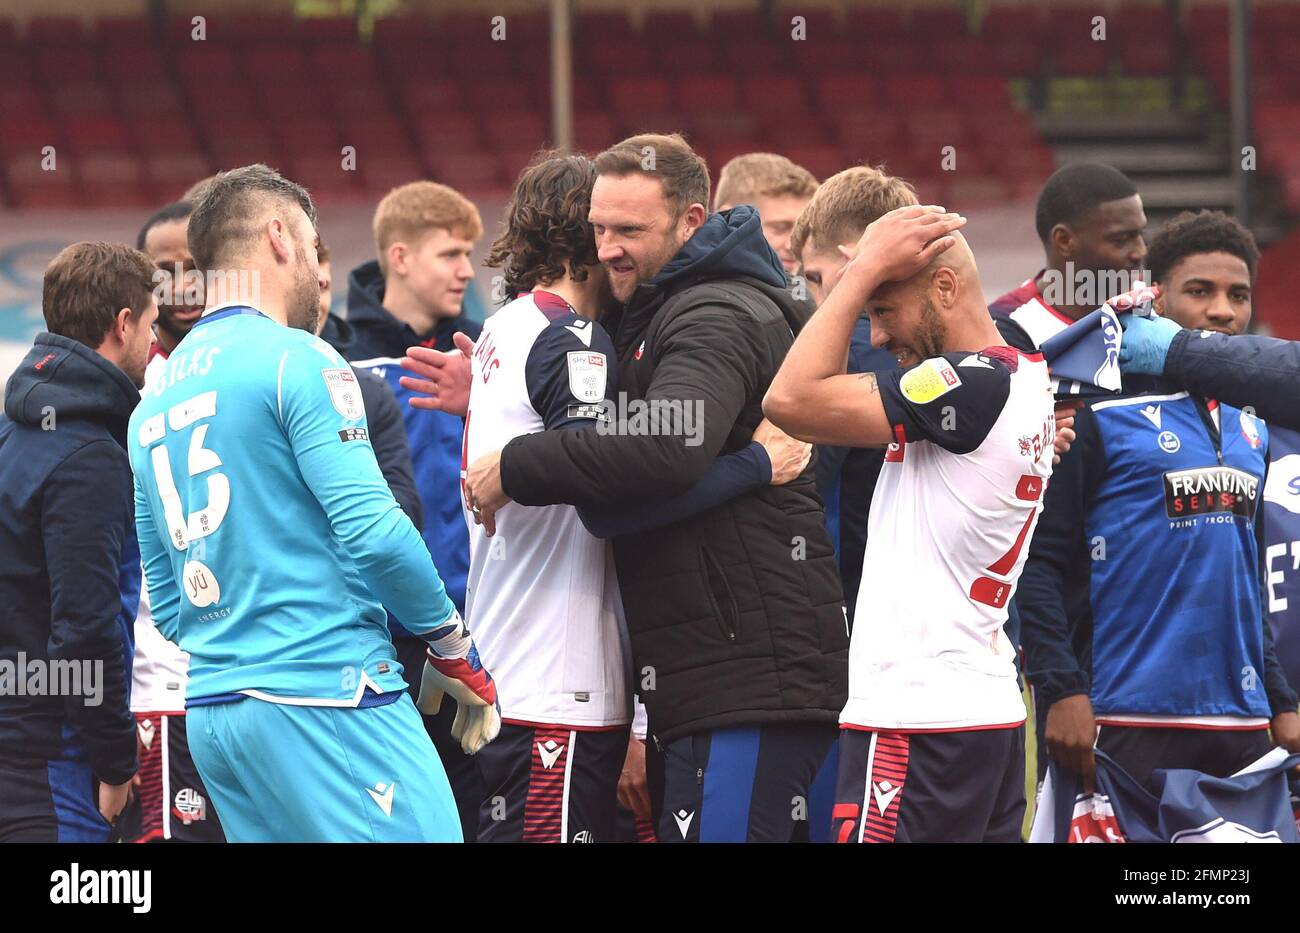 Bolton manager Ian Evatt hugs his players as they celebrate promotion after their 4-1 win against Crawley in the Sky Bet League Two match between Crawley Town and Bolton Wanderers at the People's Pension Stadium  , Crawley ,  UK - 8th May 2021 -  EDITORIAL USE ONLY No use with unauthorised audio, video, data, fixture lists, club/league logos or “live” services. Online in-match use limited to 120 images, no video emulation. No use in betting, games or single club/league/player publications Stock Photo